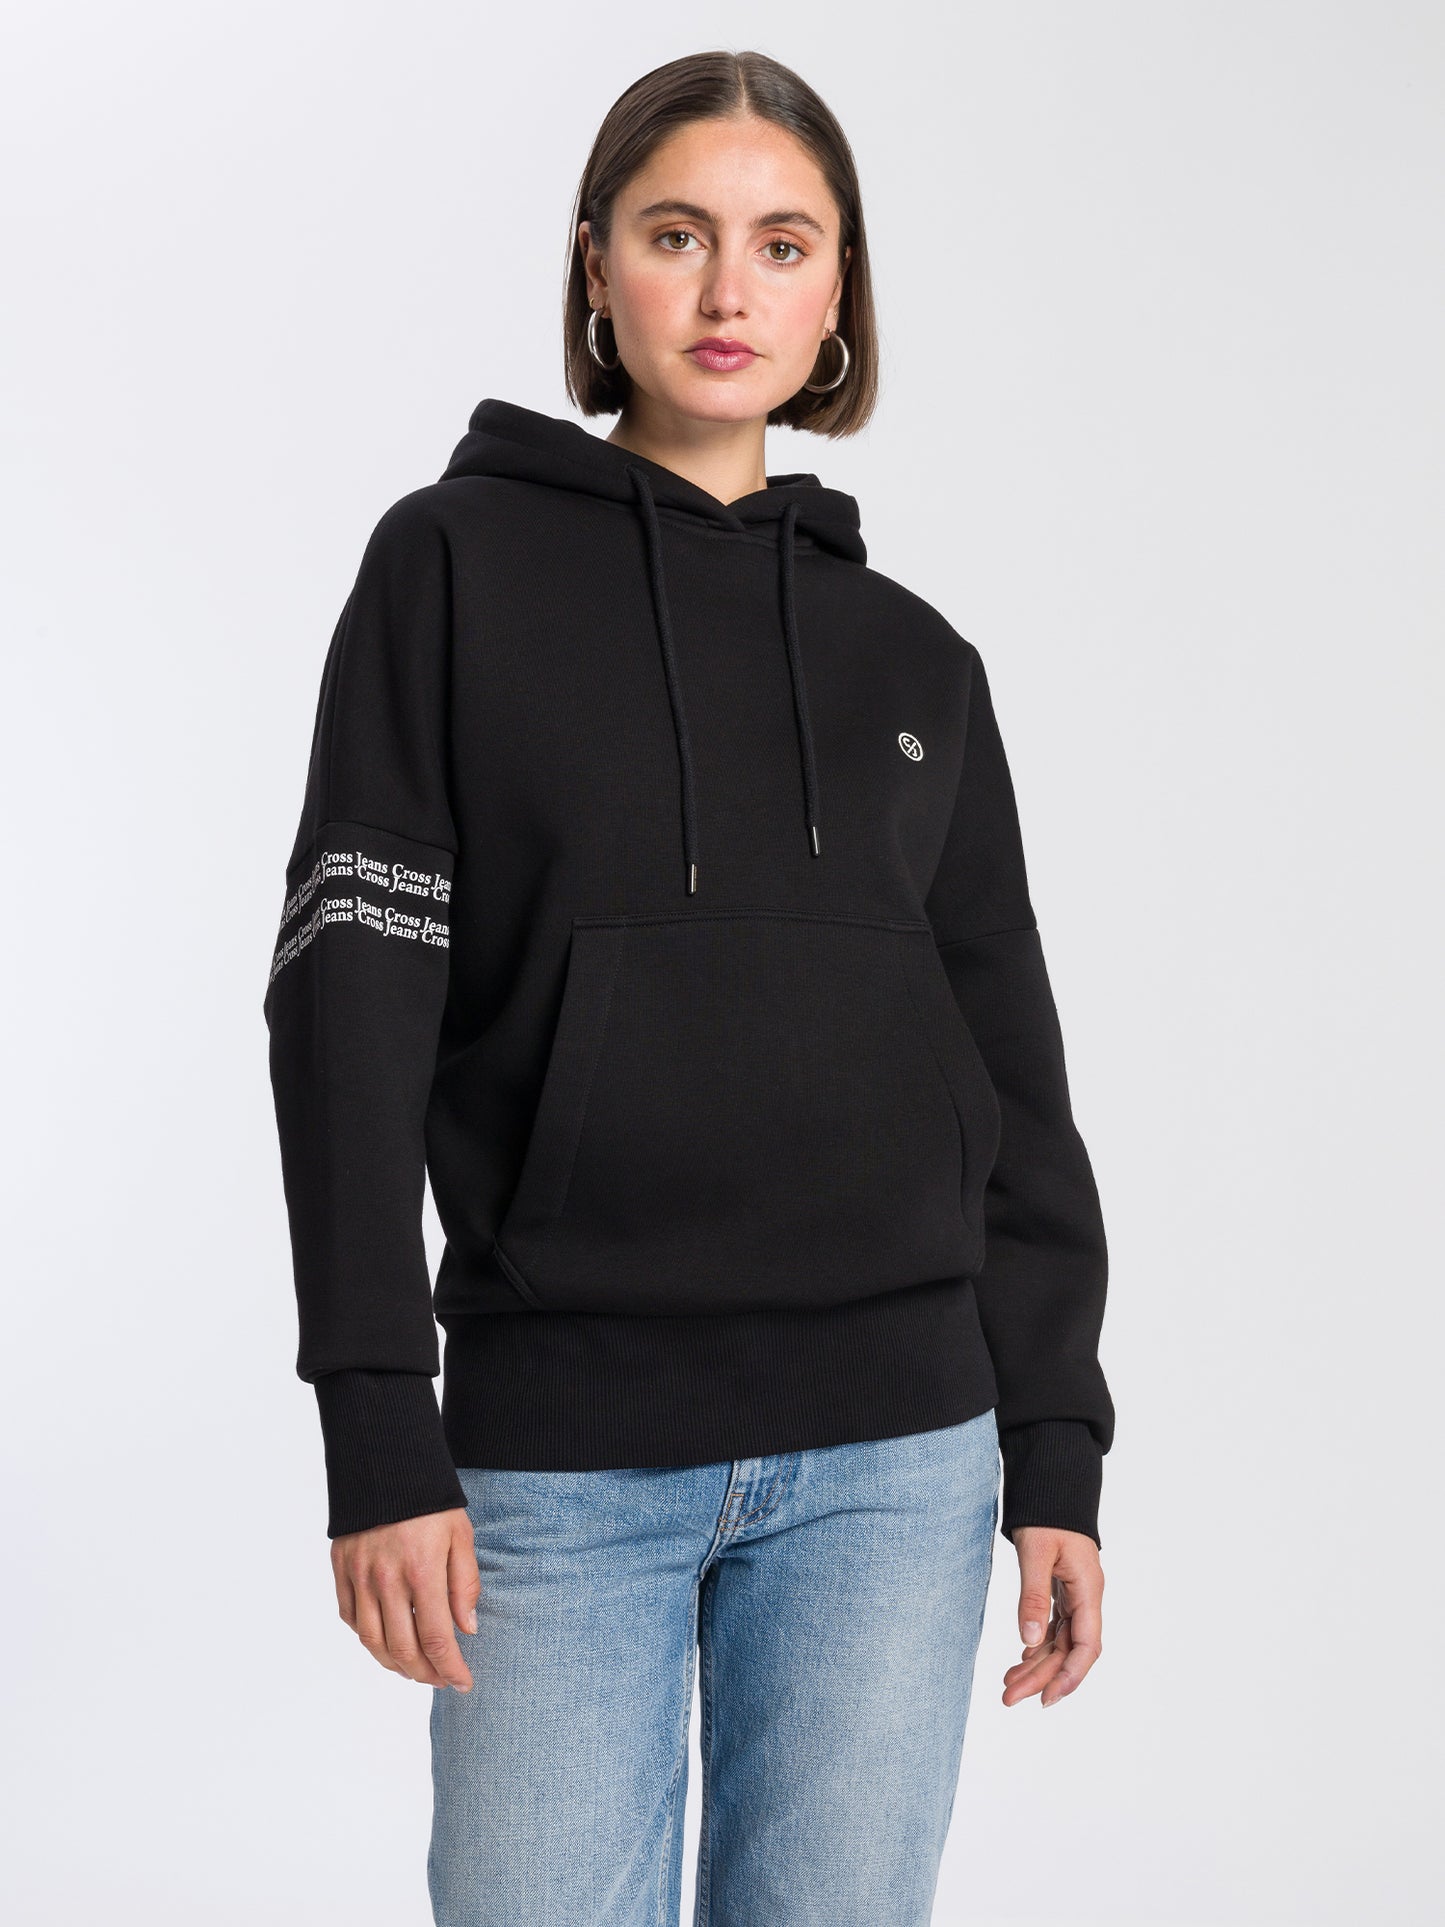 Women's oversize hoodie with logo print on the sleeve, black